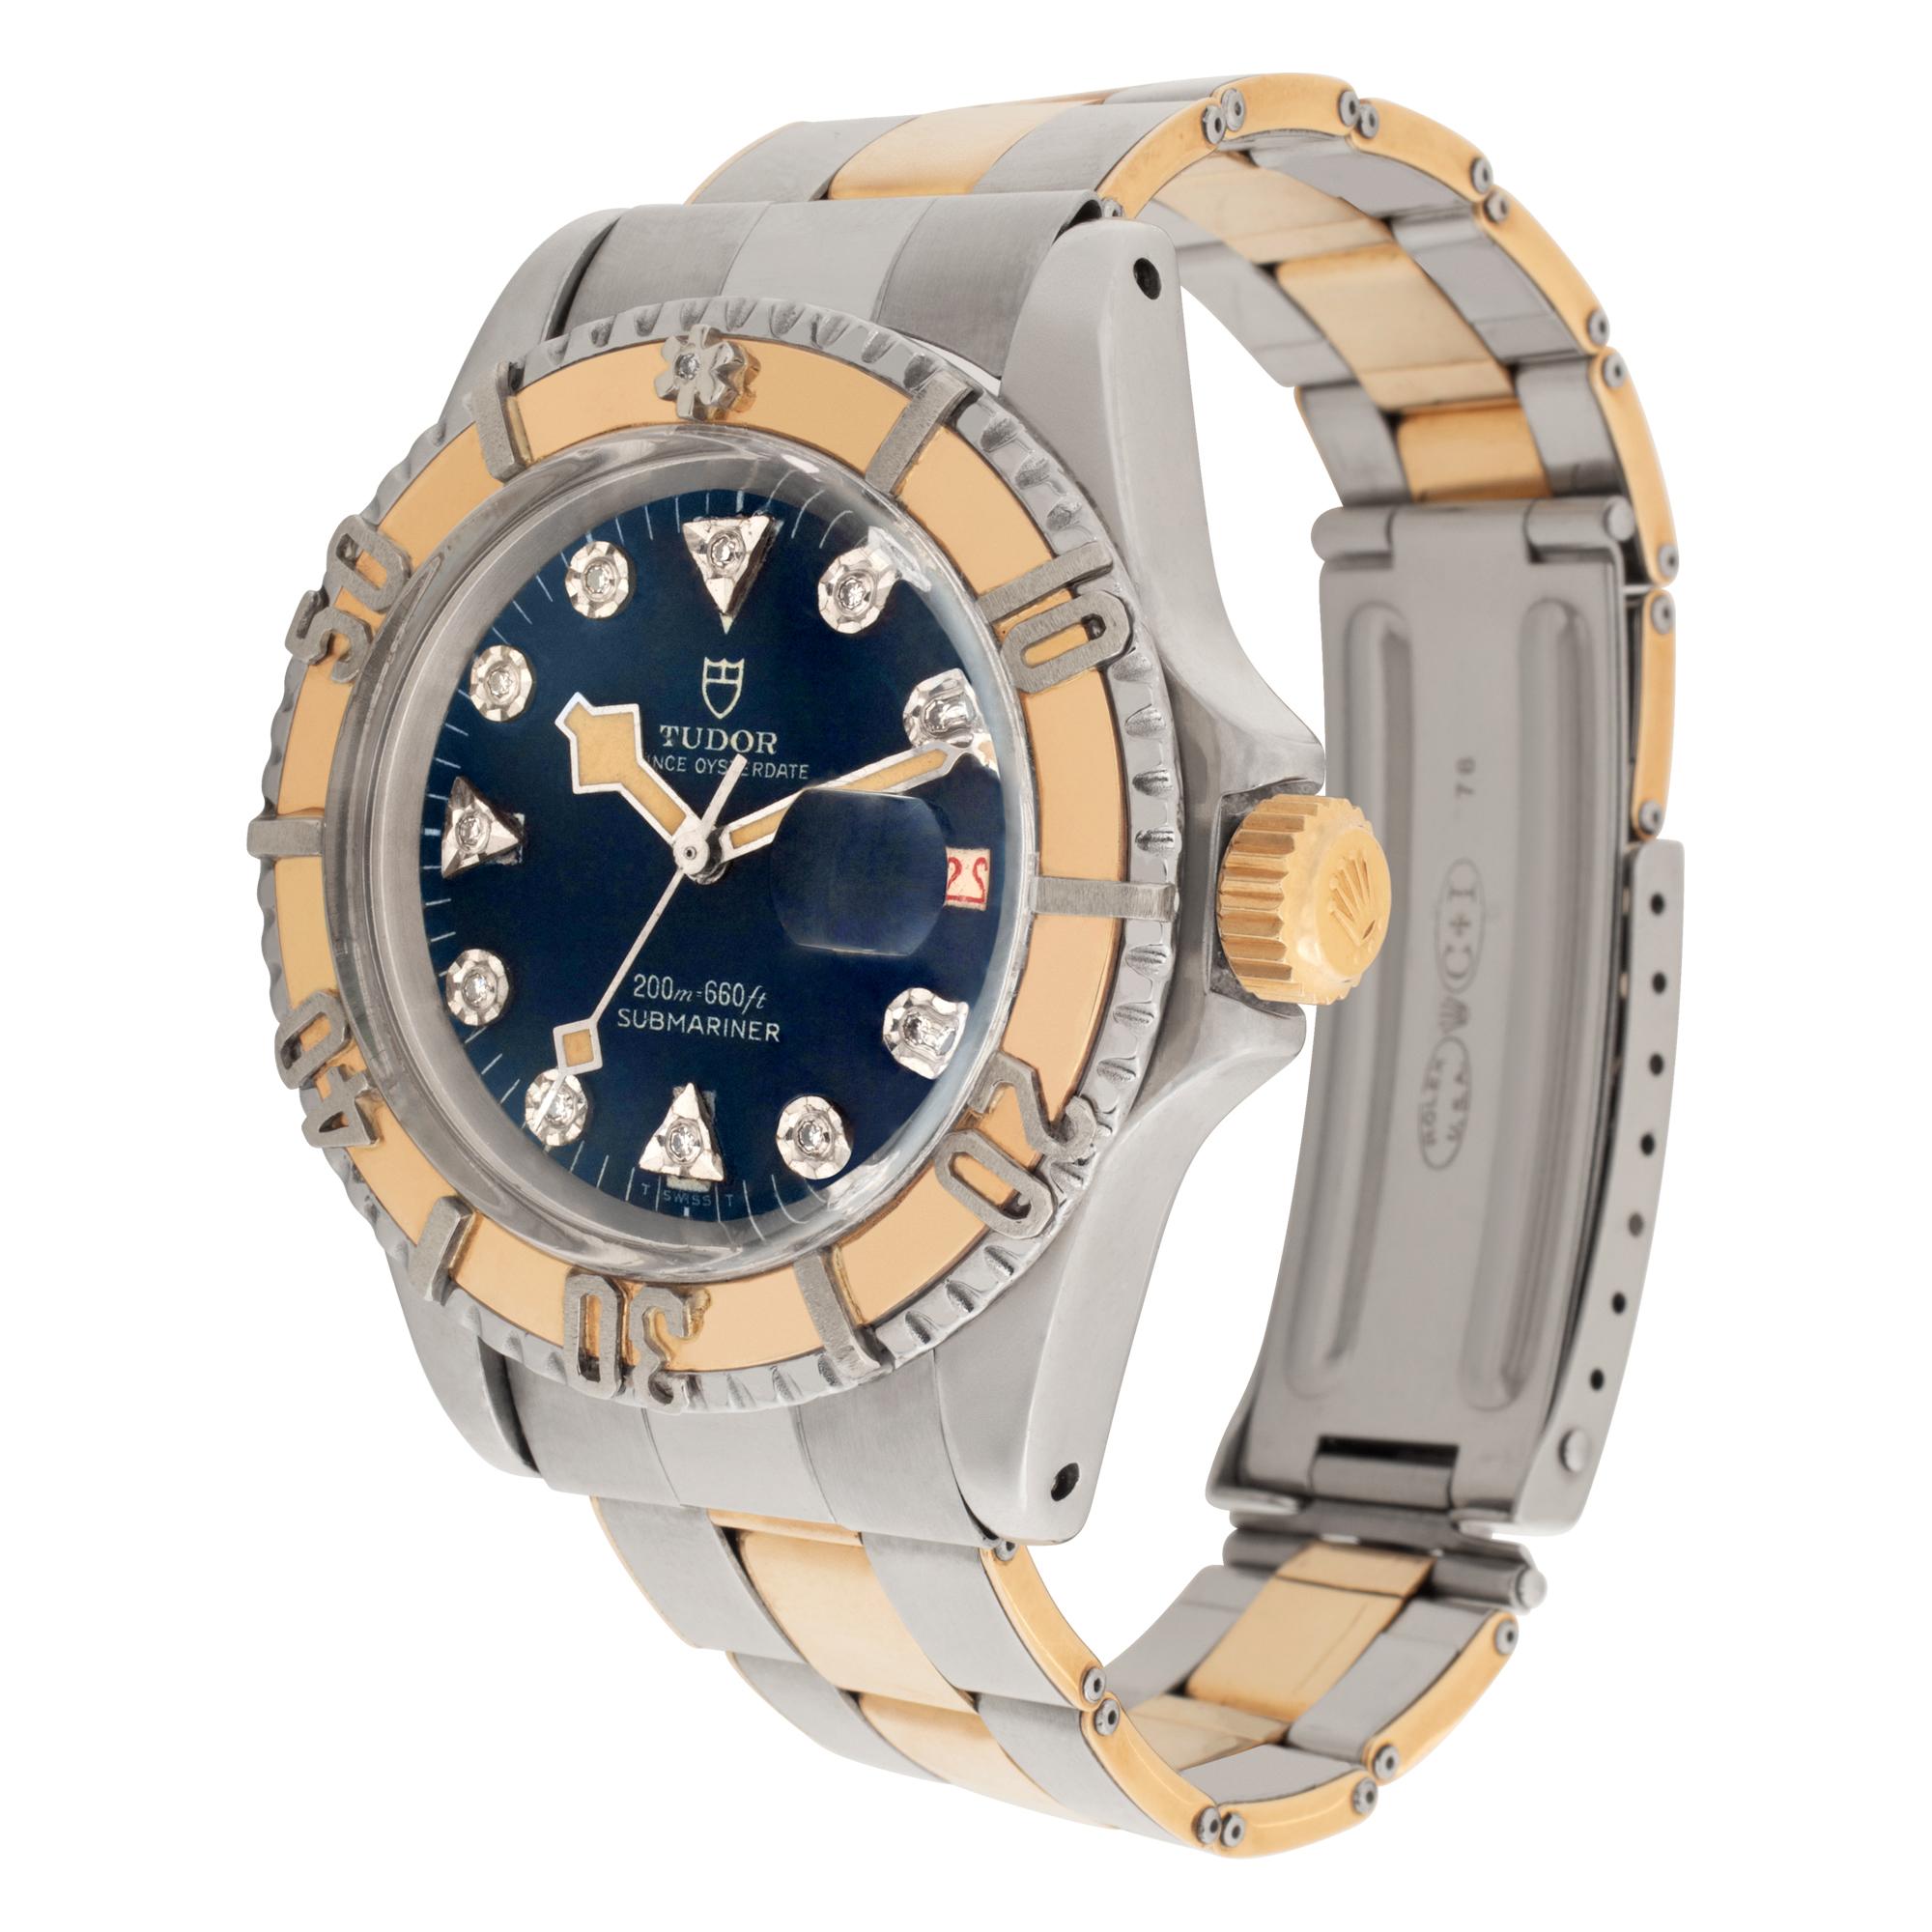 Vintage and rare! Tudor Tuddle Prince Oyster Date Submariner with custom blue diamond dial and revolving custom submariner diving bezel in 14k gold & stainless steel. Rolex oyster 14k gold and stainless steel bracelet 1978. Movement cal. 2484. Auto